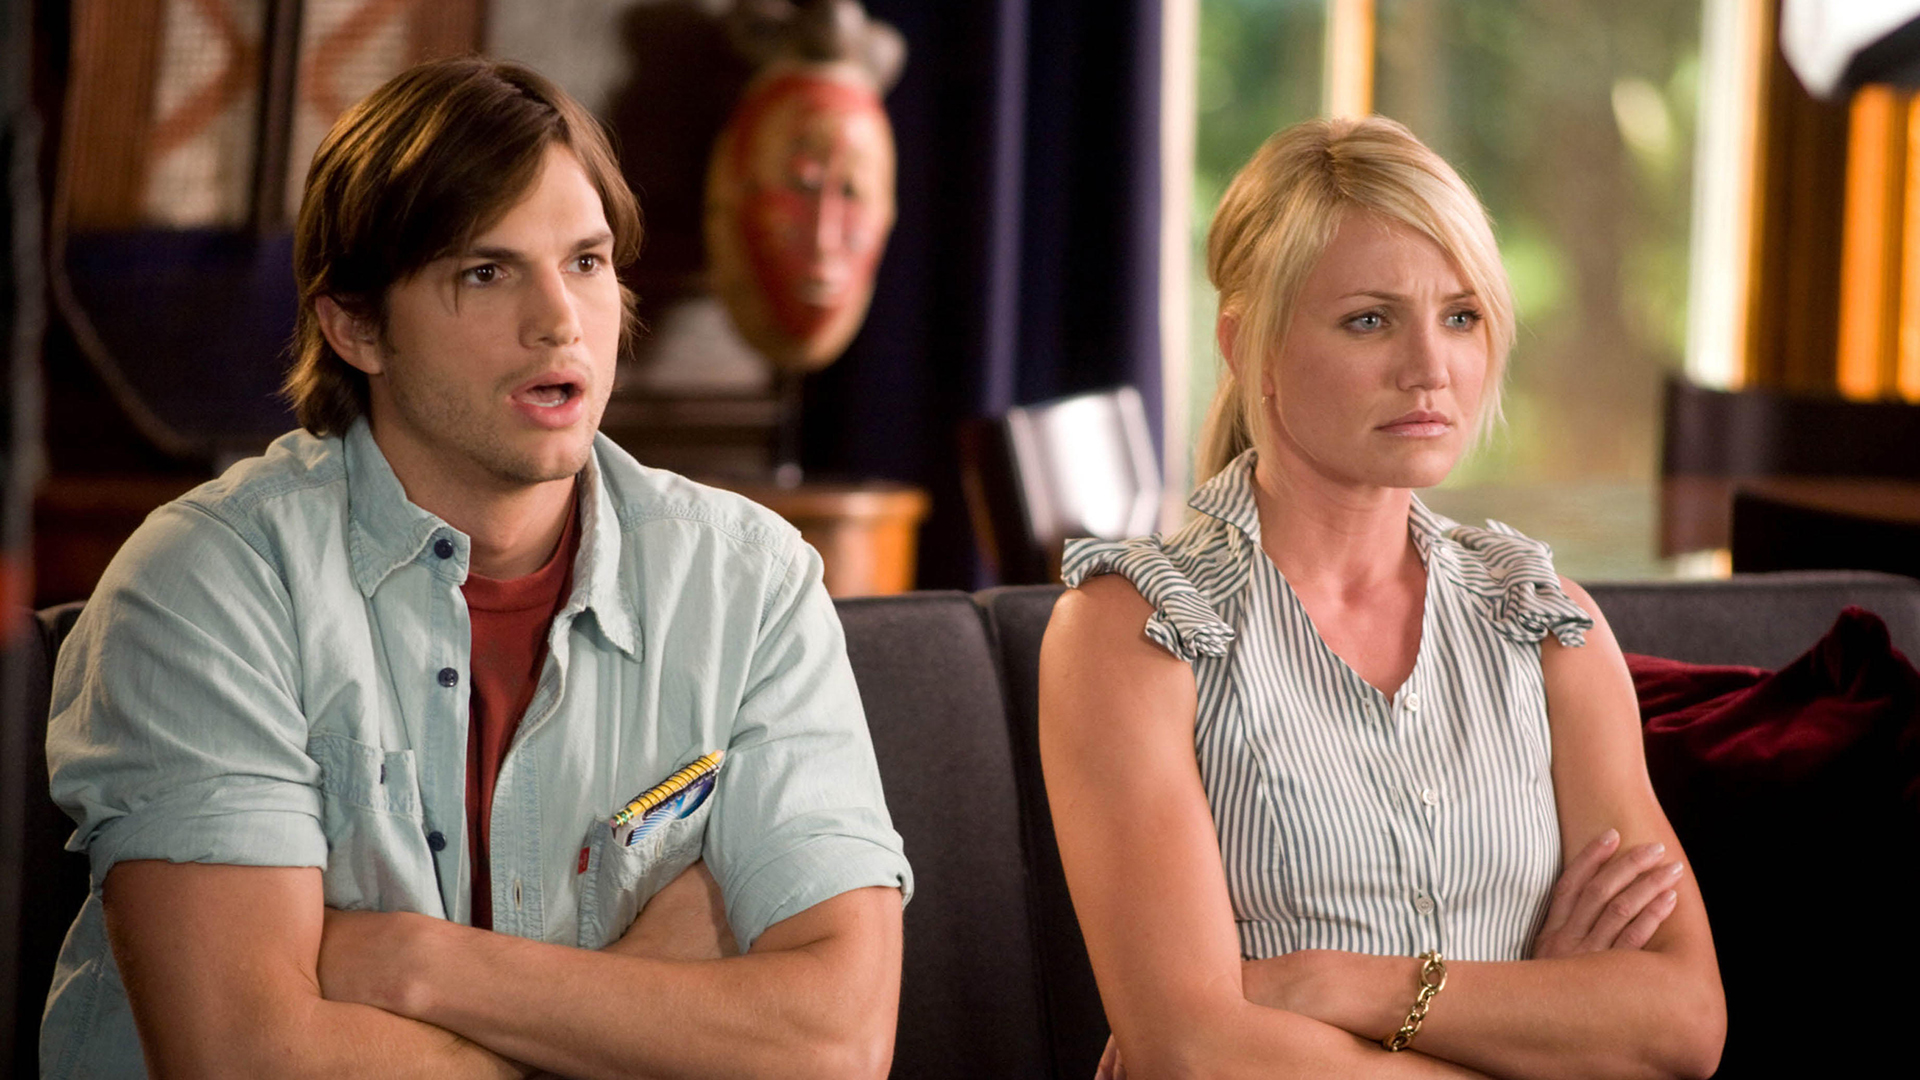 10 Comedies From The 2000s That Will Make You Nostalgic